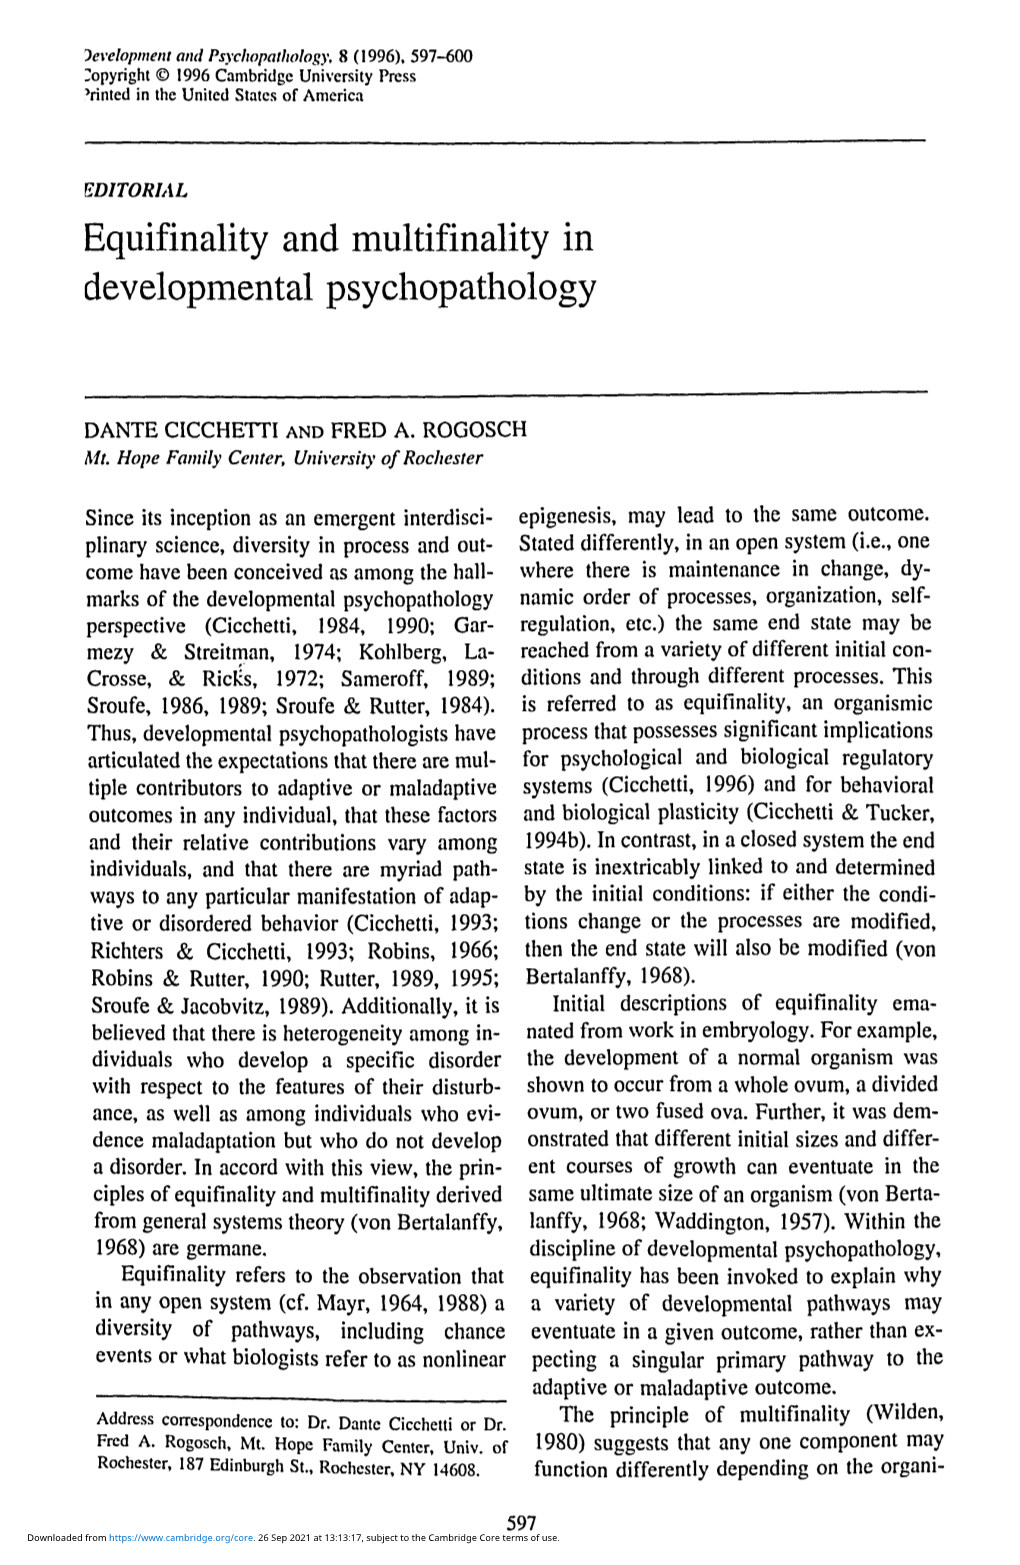 Equifinality and Multifinality in Developmental Psychopathology